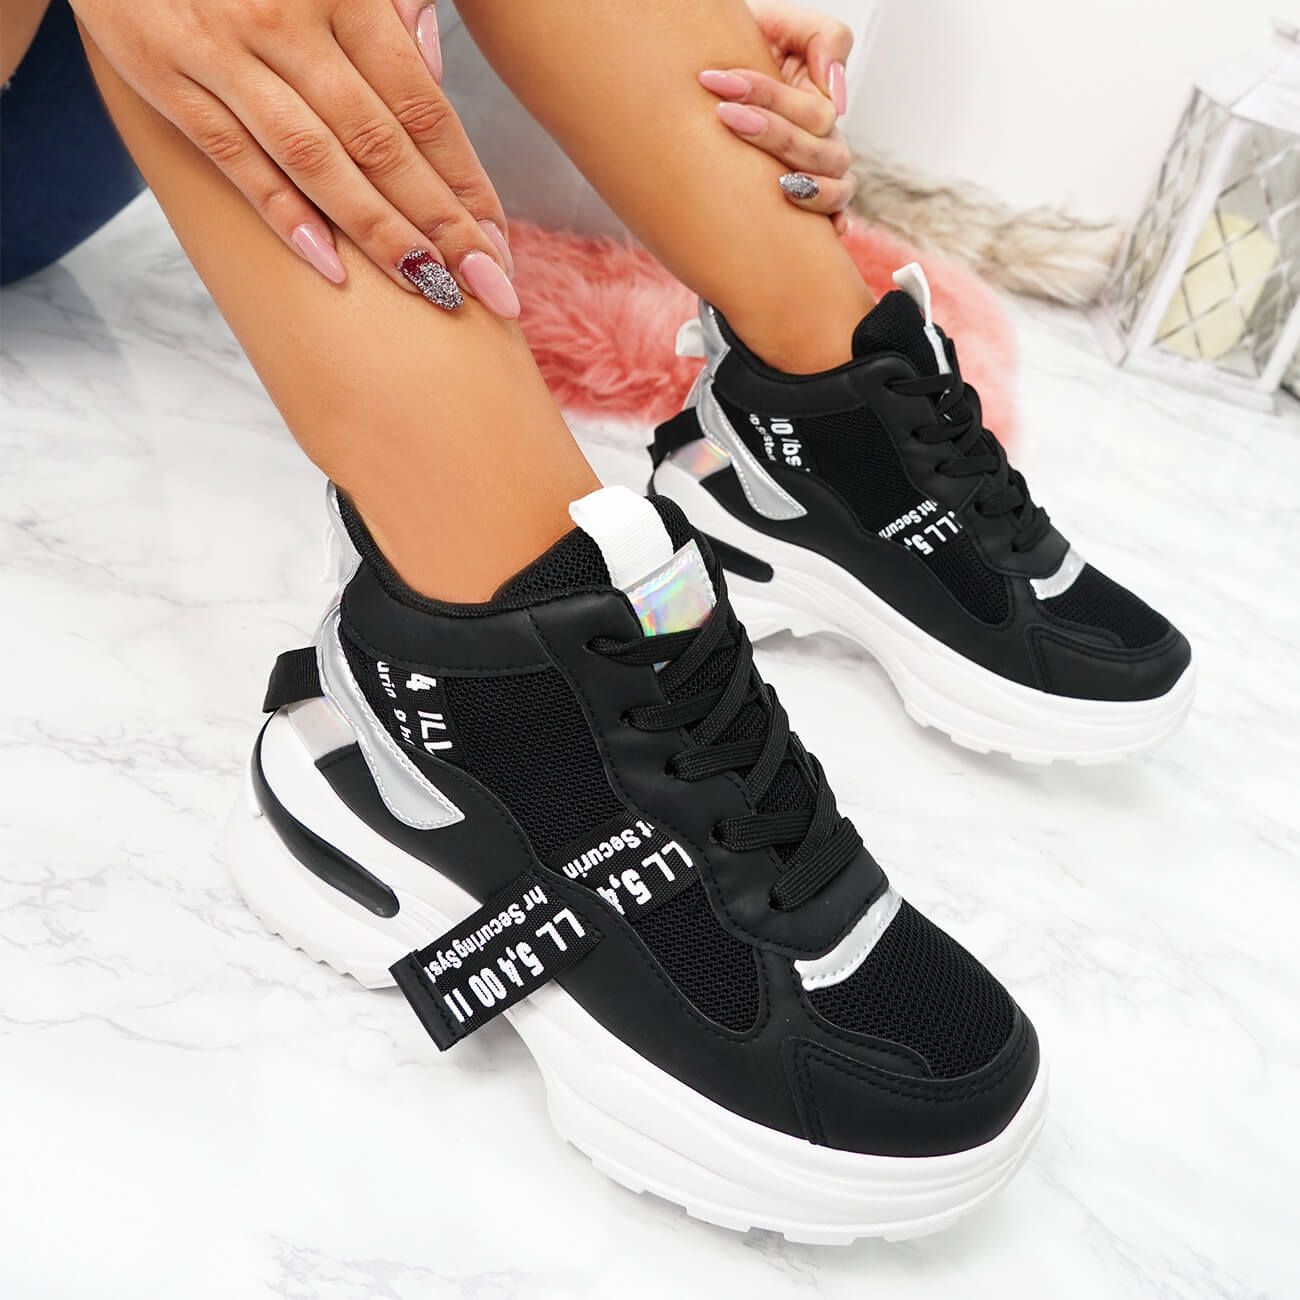 NEW WOMENS LADIES HIGH TOP SNEAKERS CHUNKY TRAINERS SPORTS